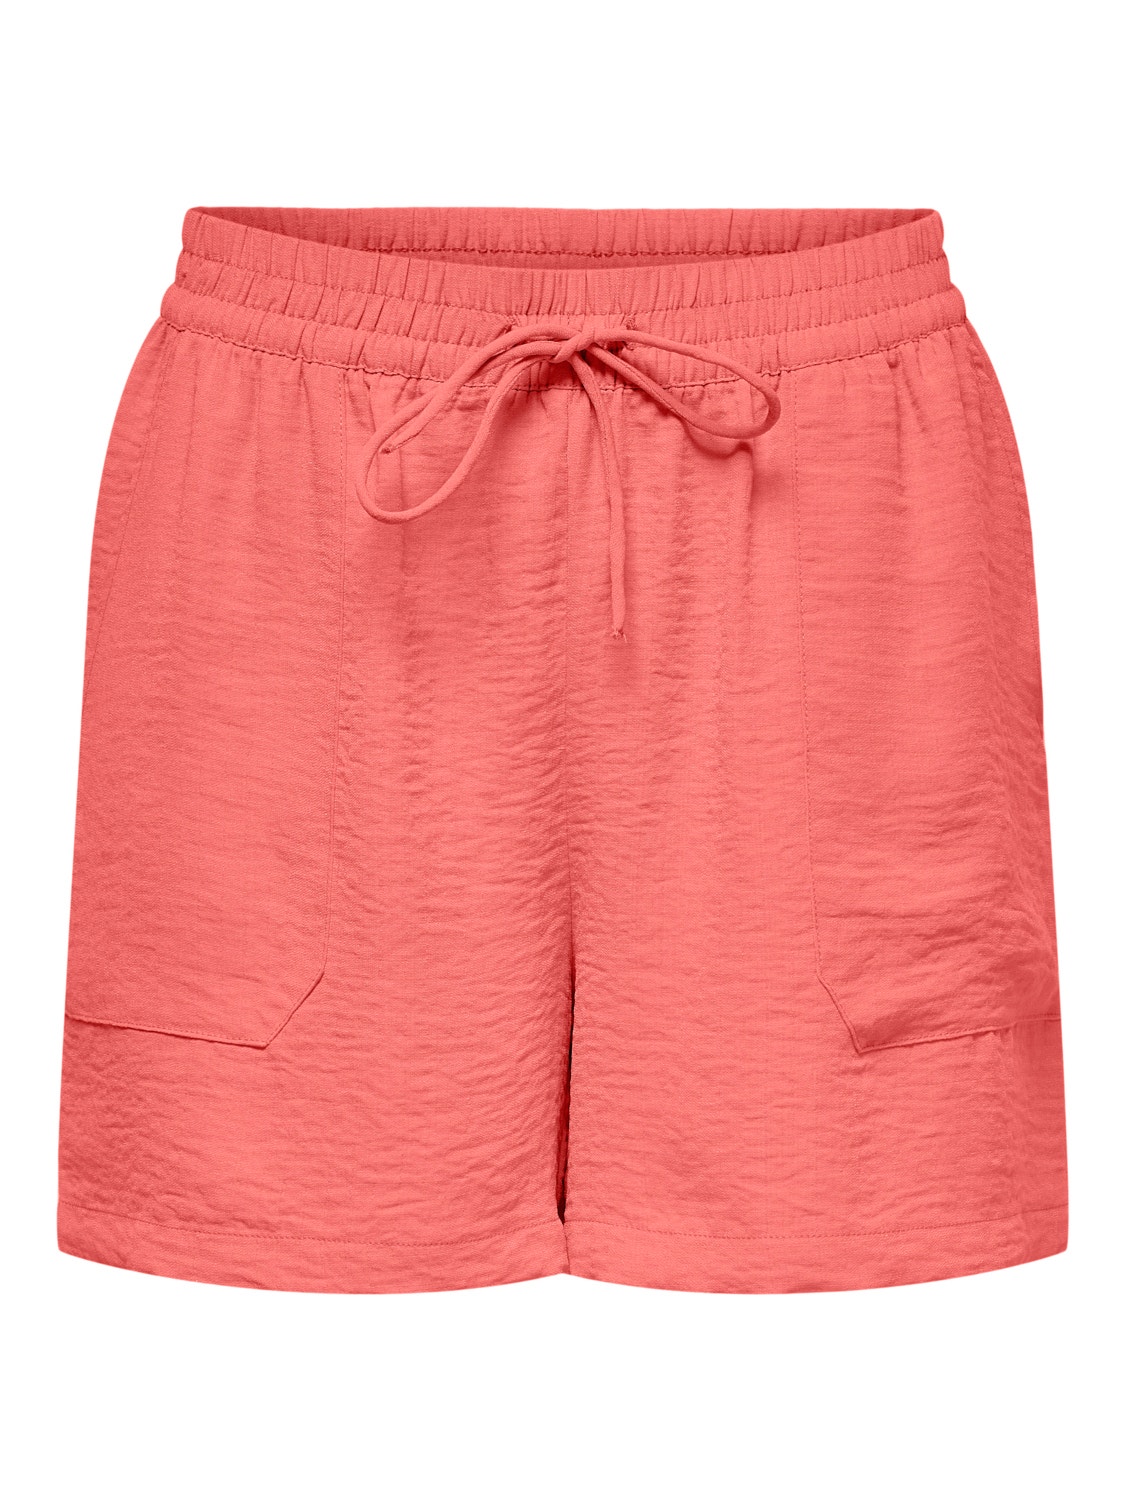 ONLY Shorts Loose Fit -Georgia Peach - 15229049